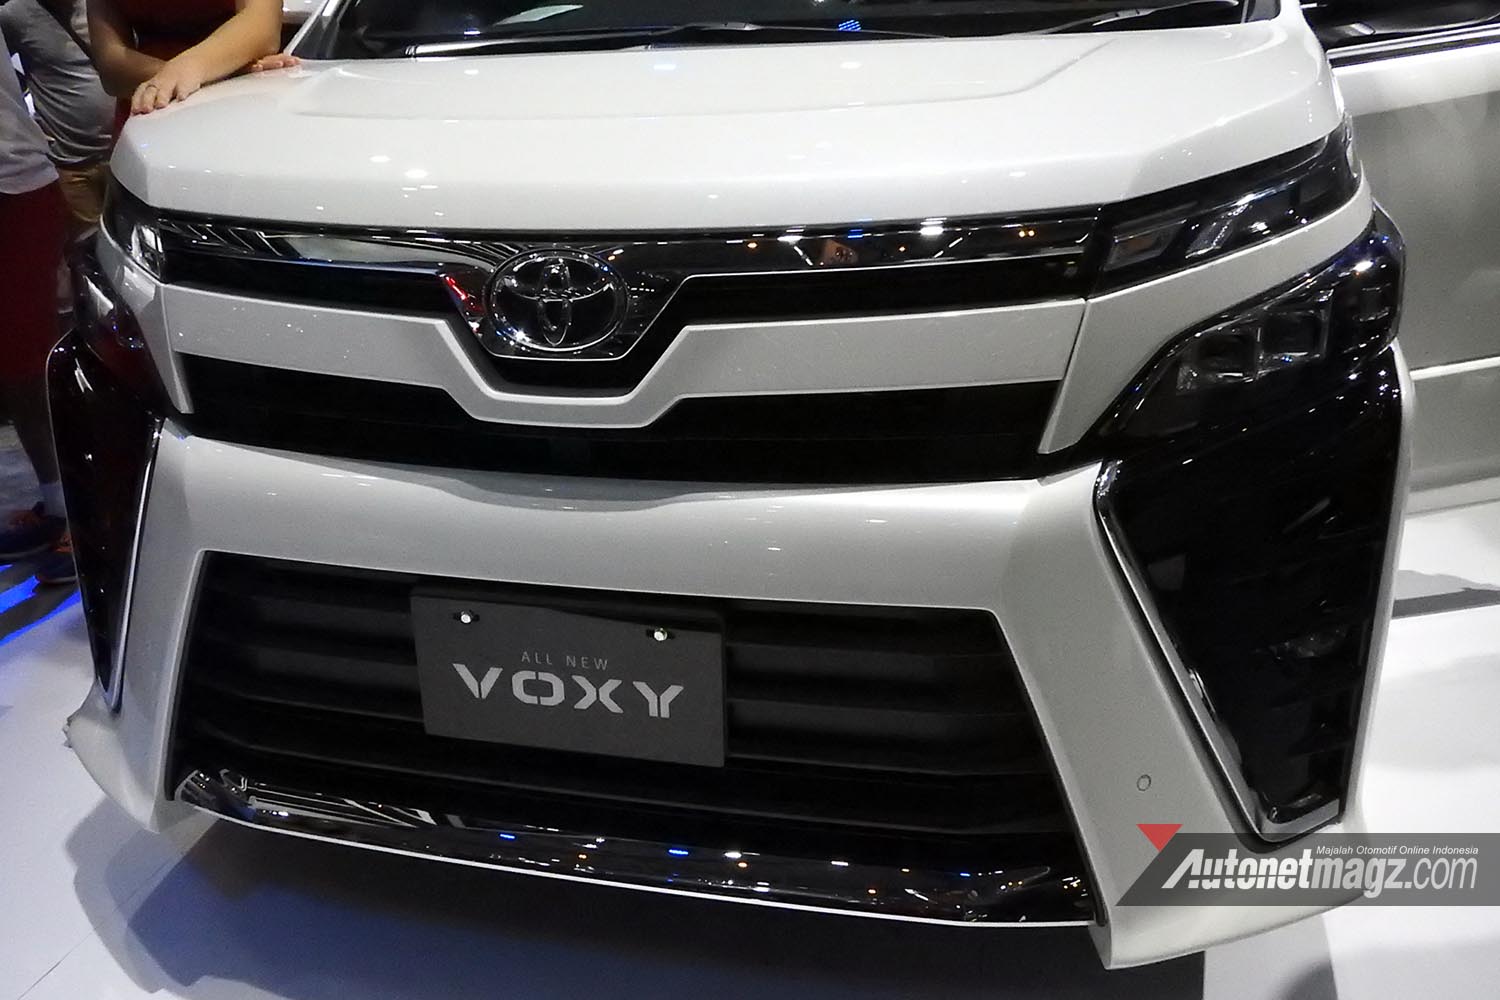 Mobil Baru, toyota voxy front headlamp led grille: First Impression Review Toyota Voxy 2017 Indonesia